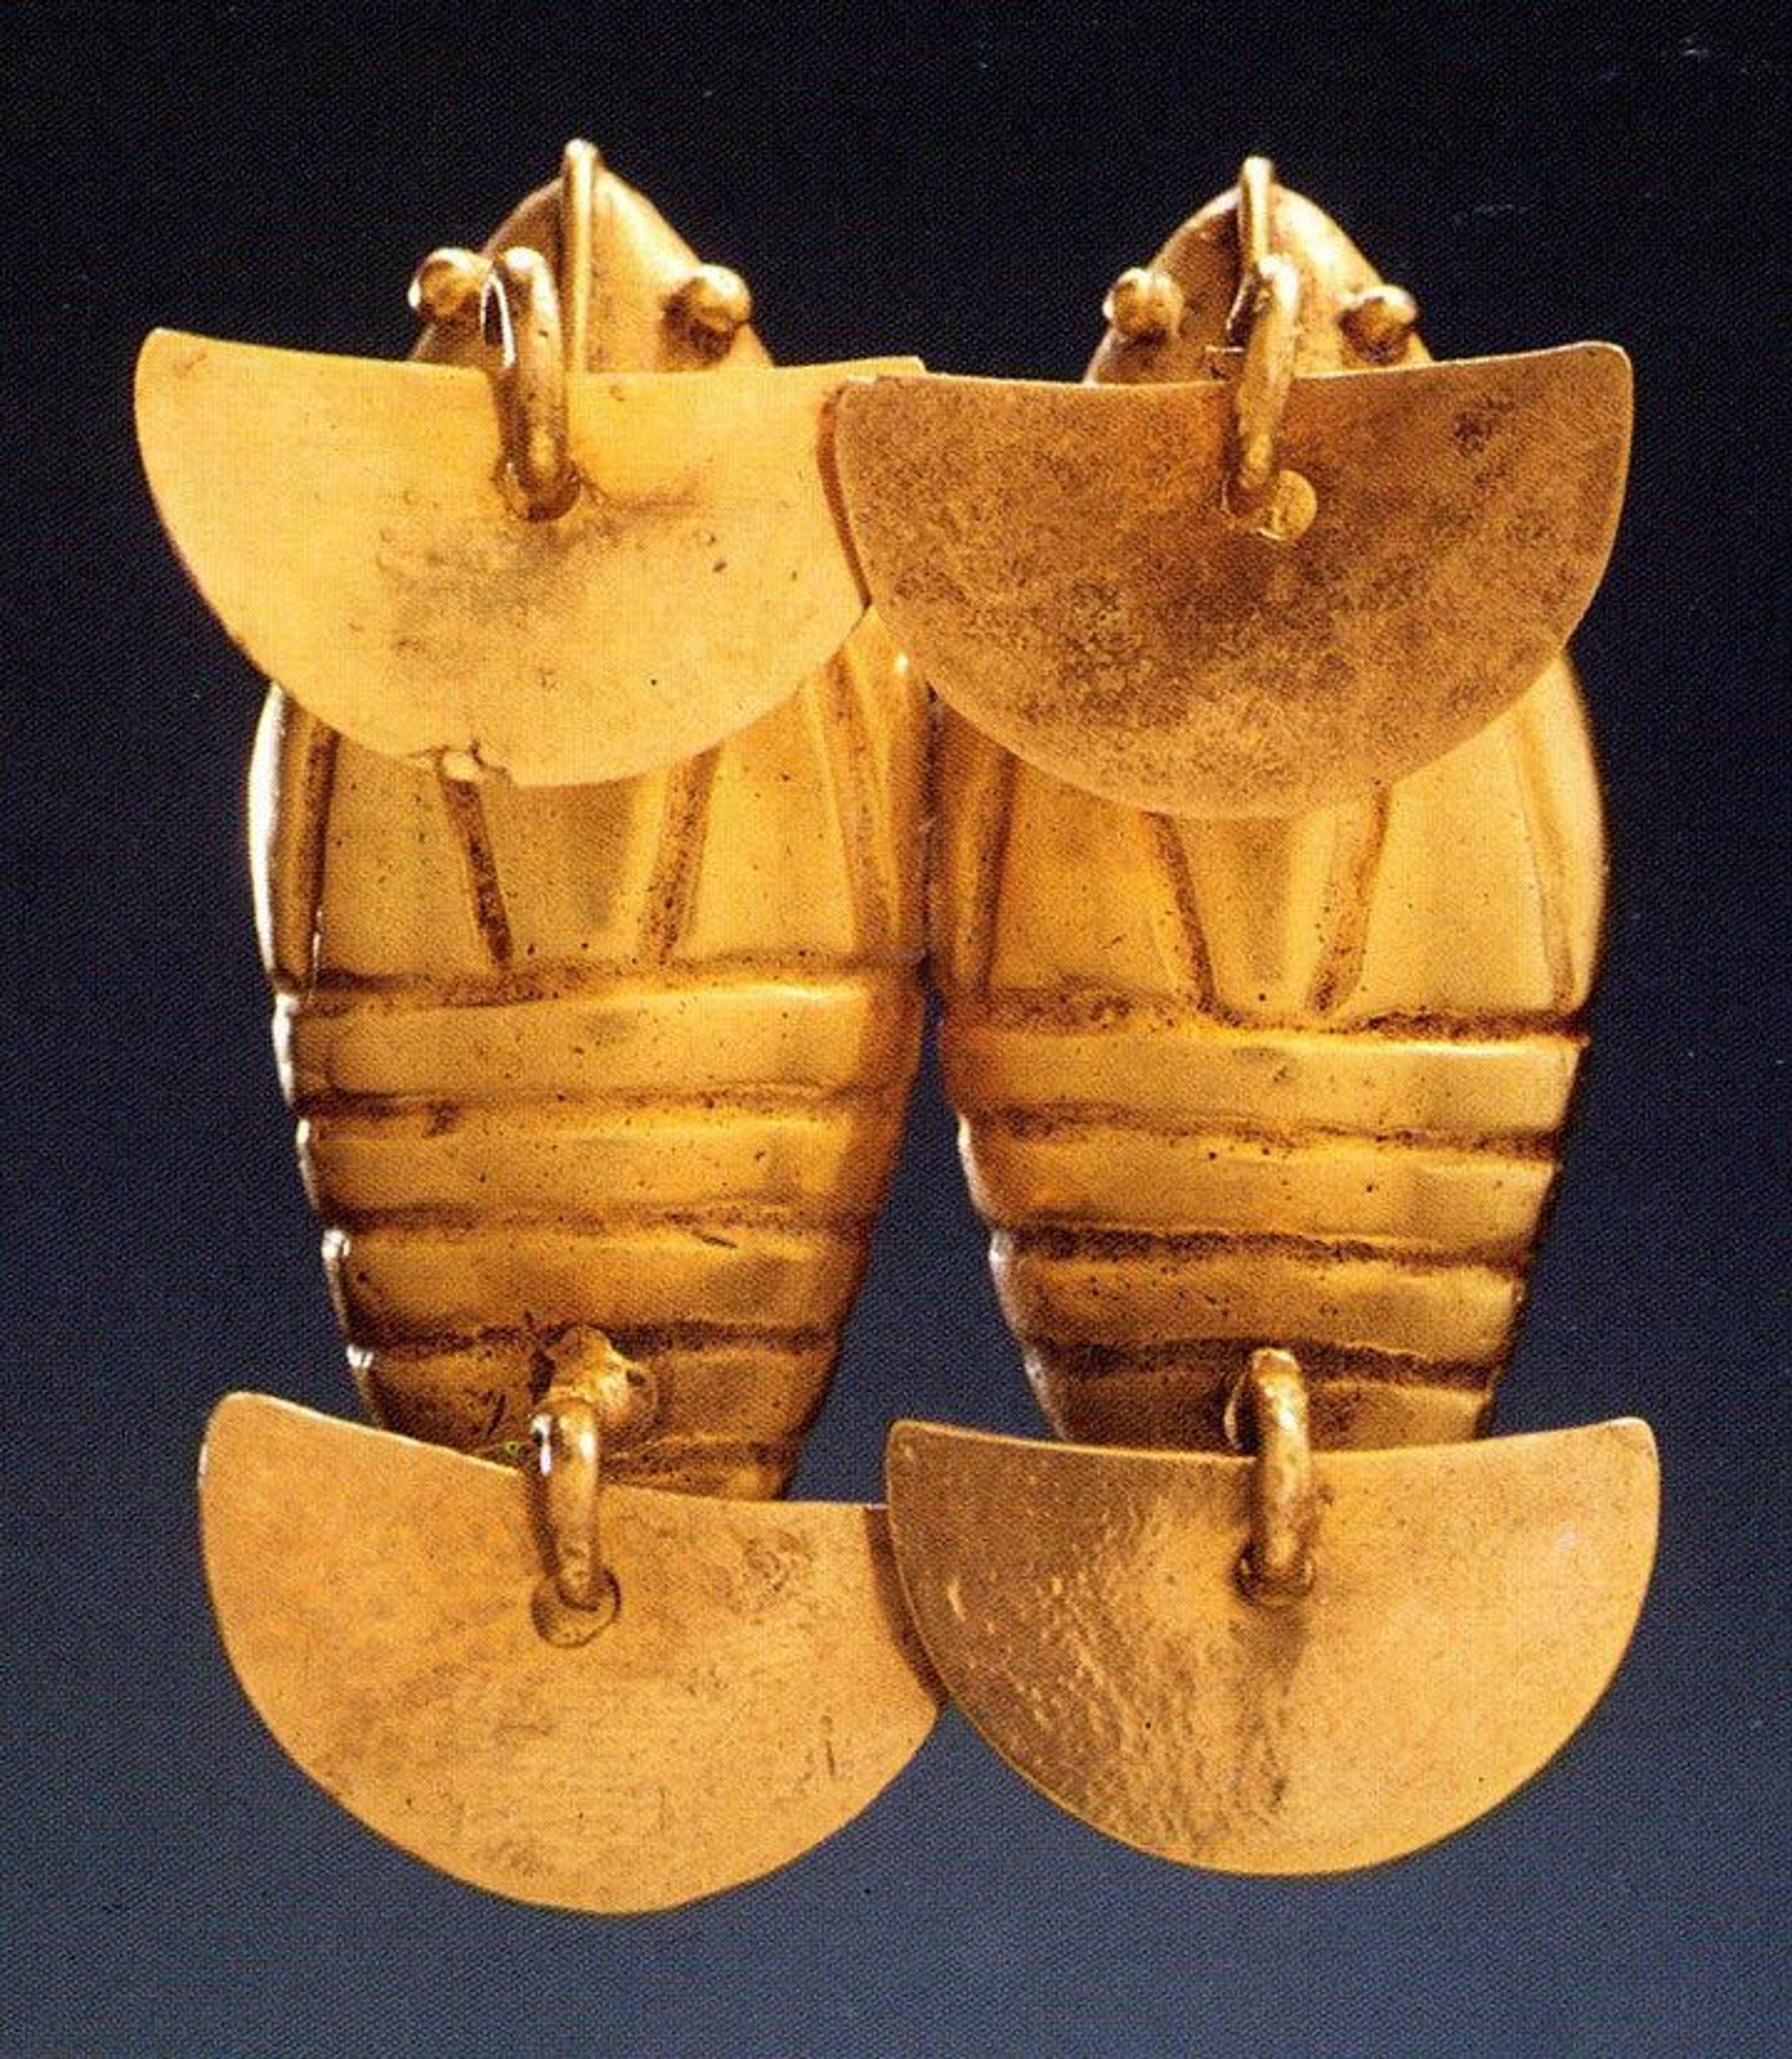 Double-insect pendant made in the Cauca River region of Colombia